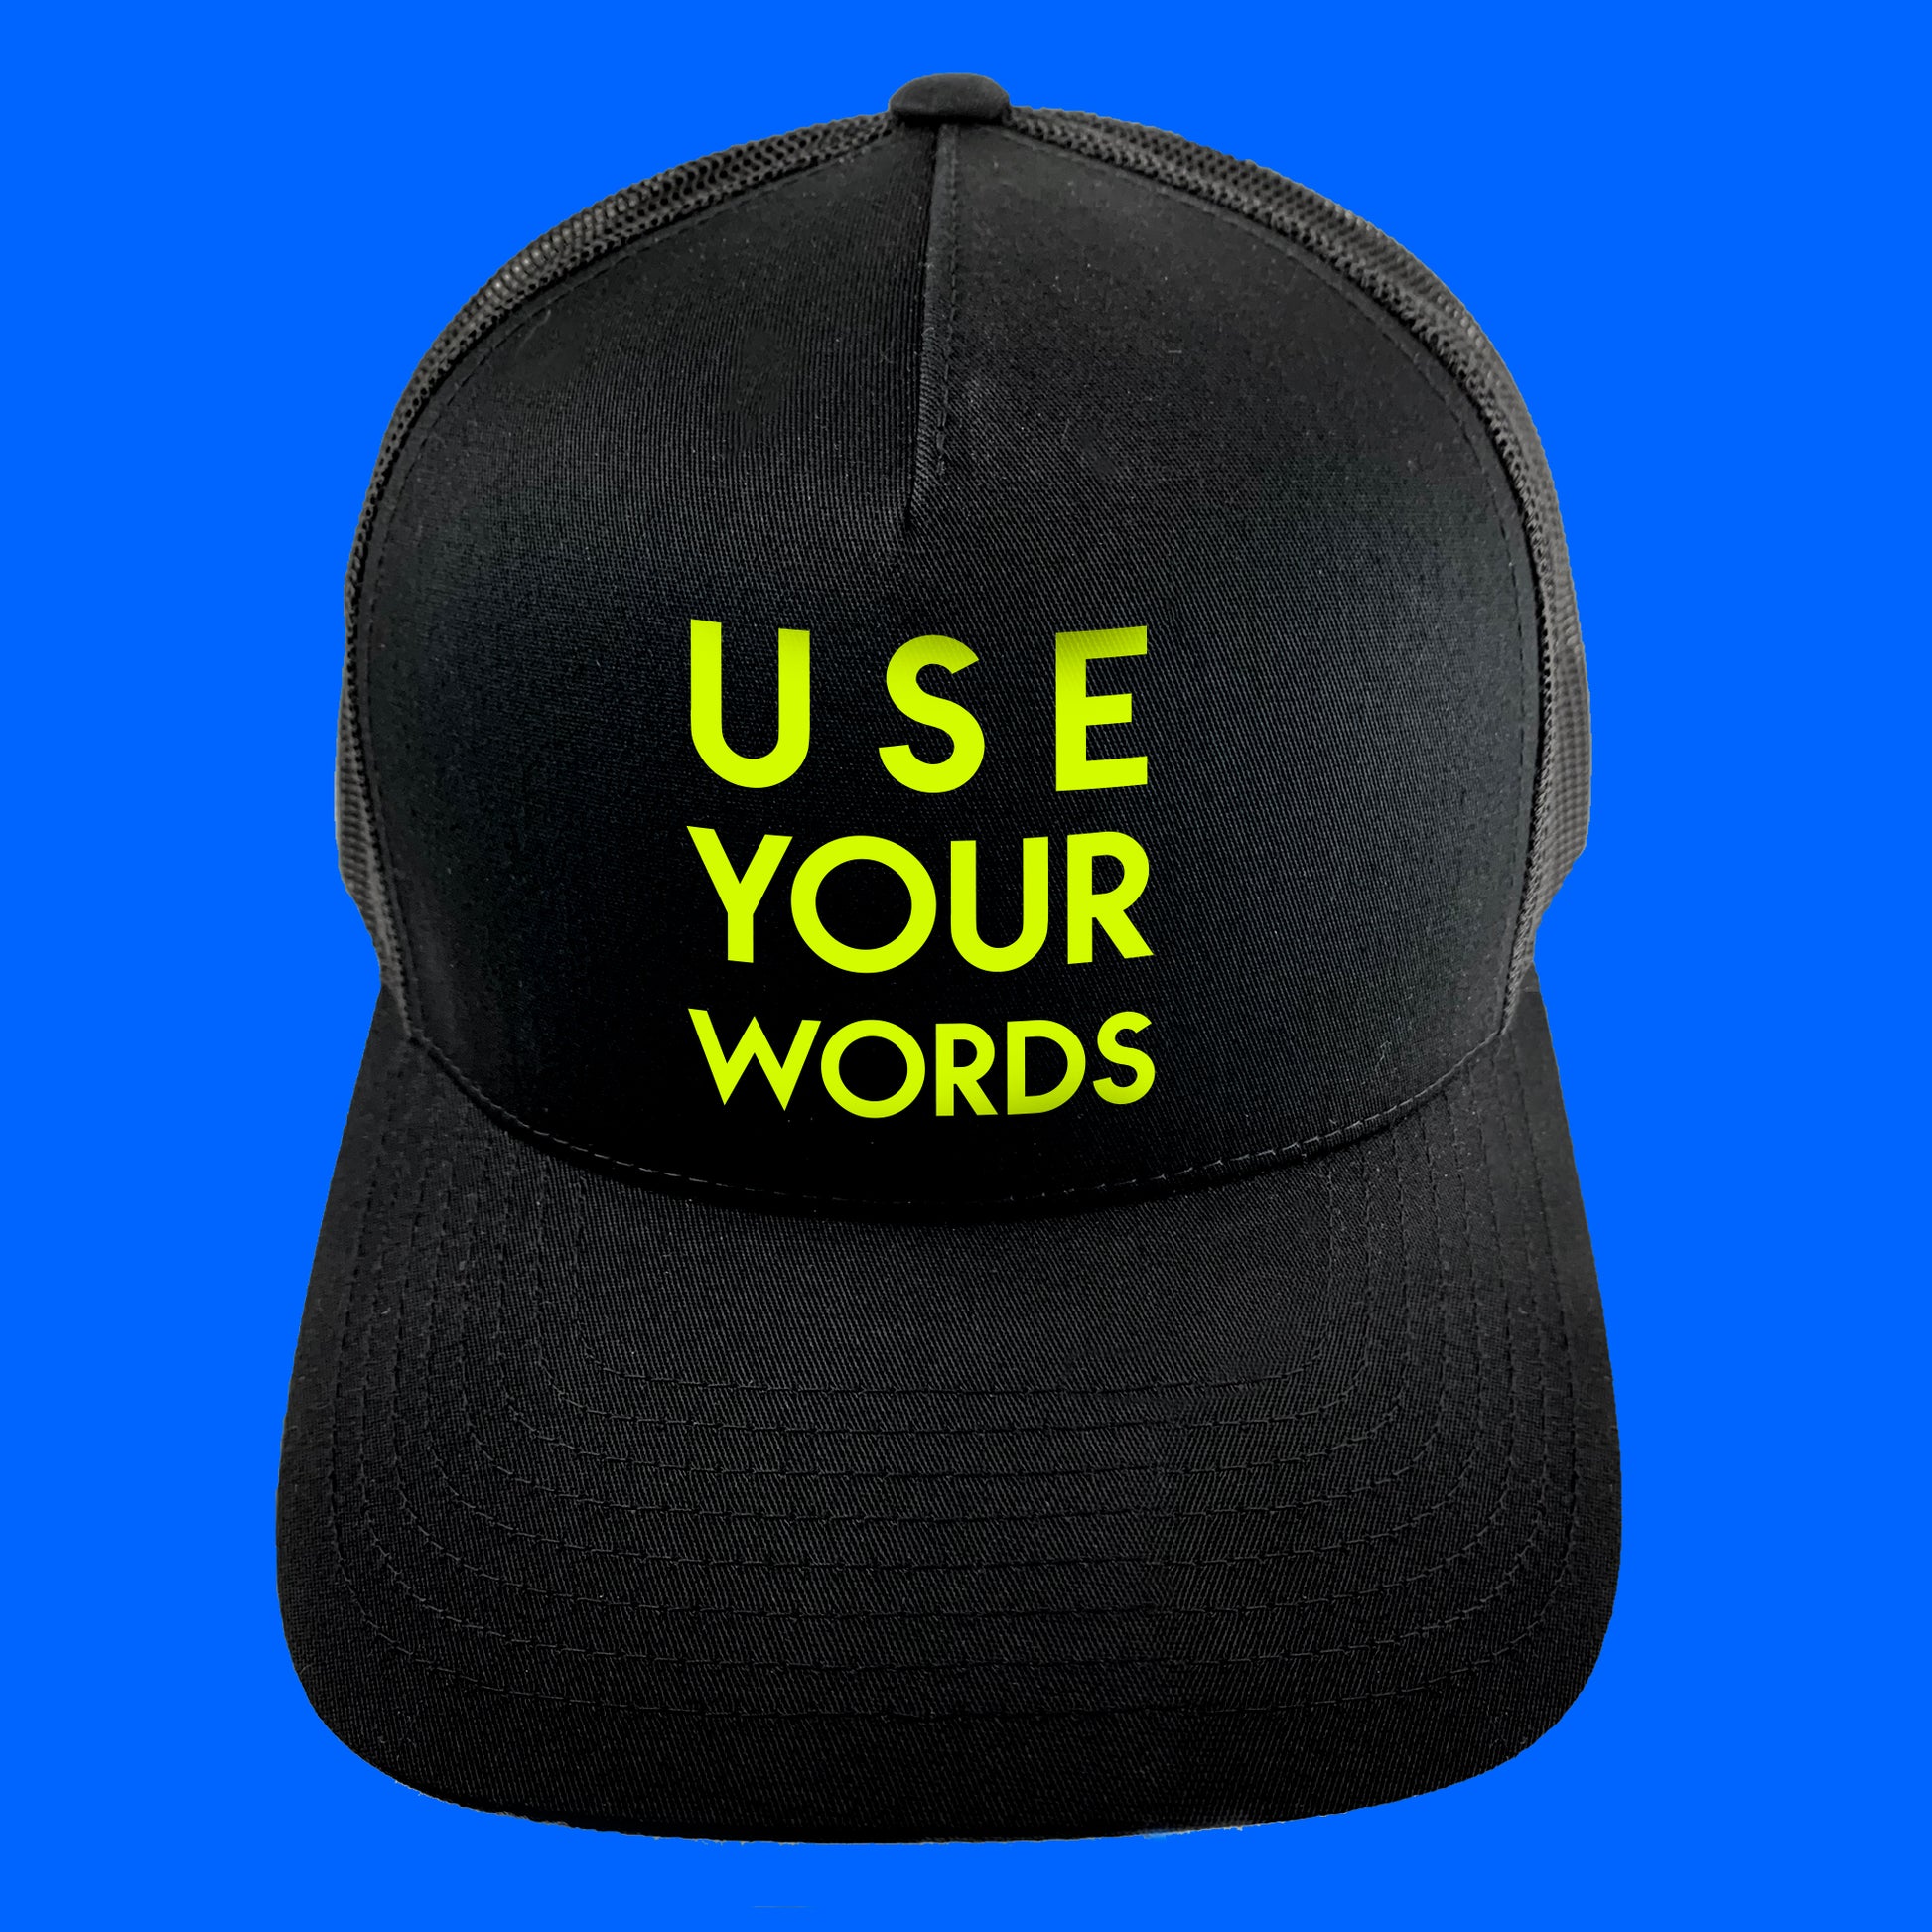 USE YOUR WORDS custom text snapback hat by Glitter Garage / BBJ - black cap with bold text in your message - sample with Use Your Words text in neon yellow matte